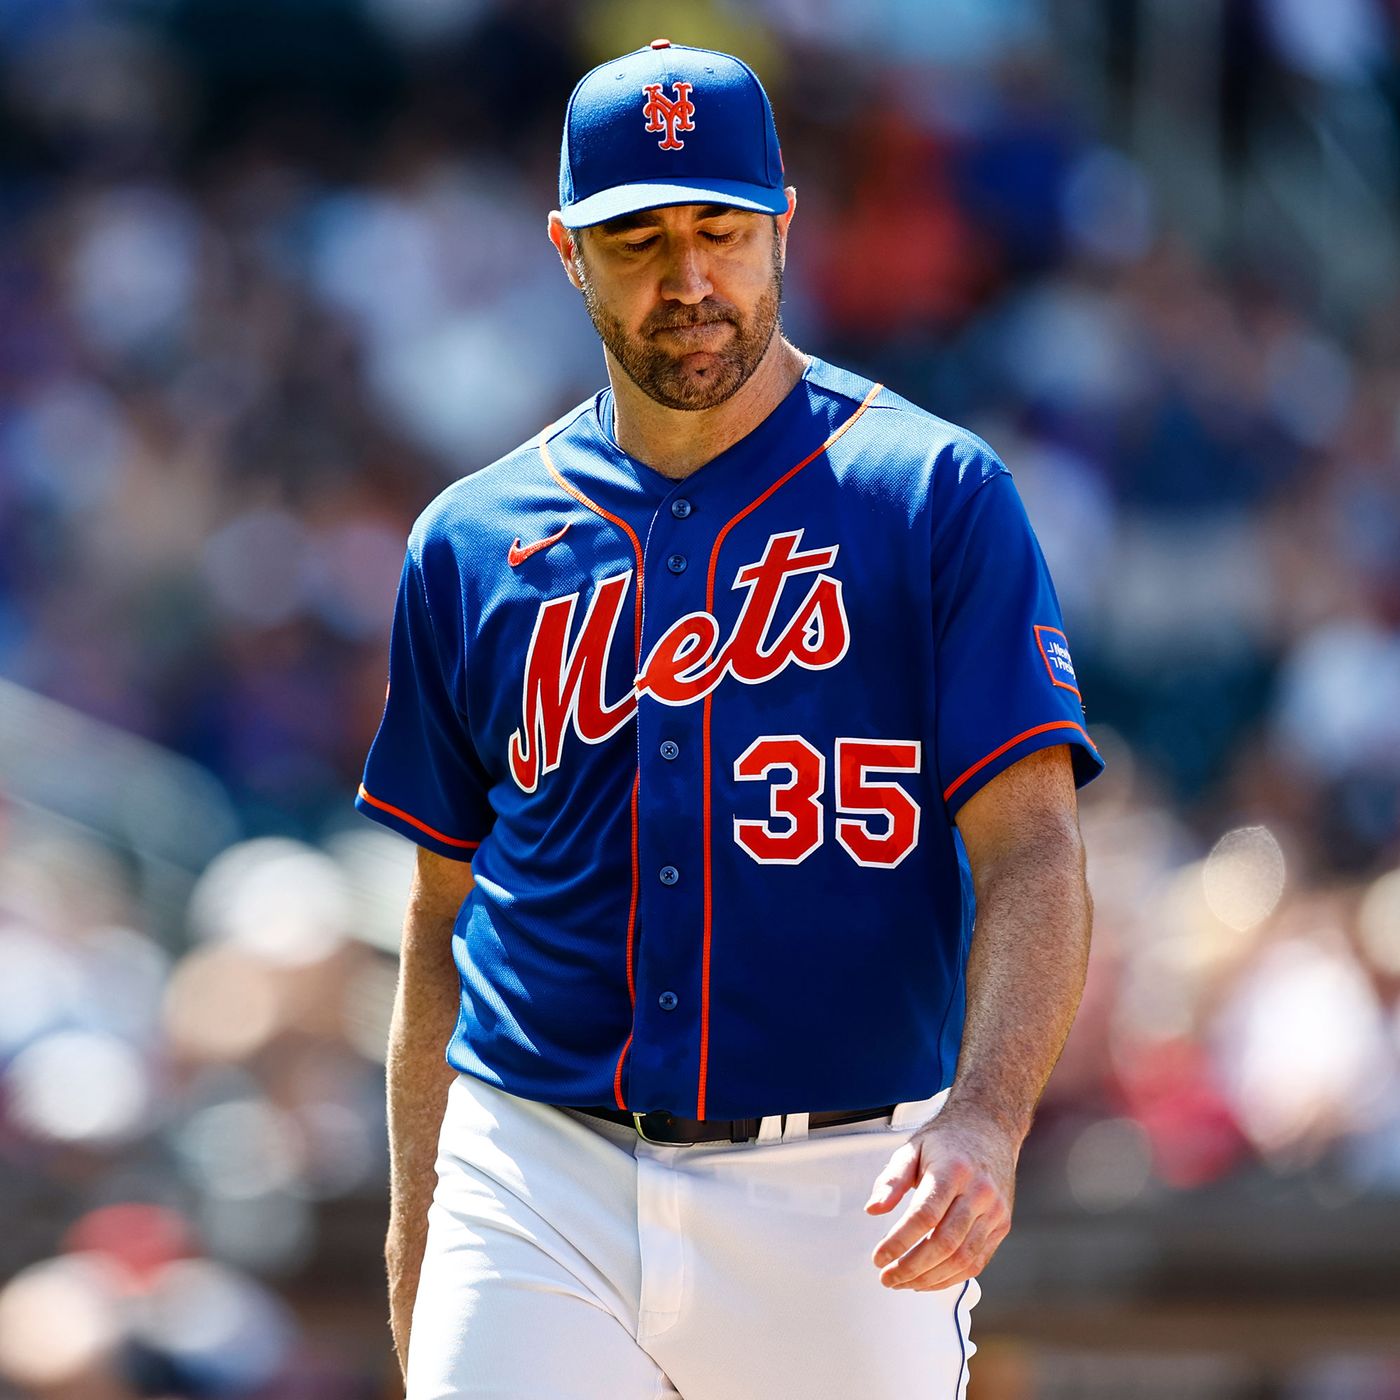 How Far Can The New York Mets Go In The MLB Postseason?